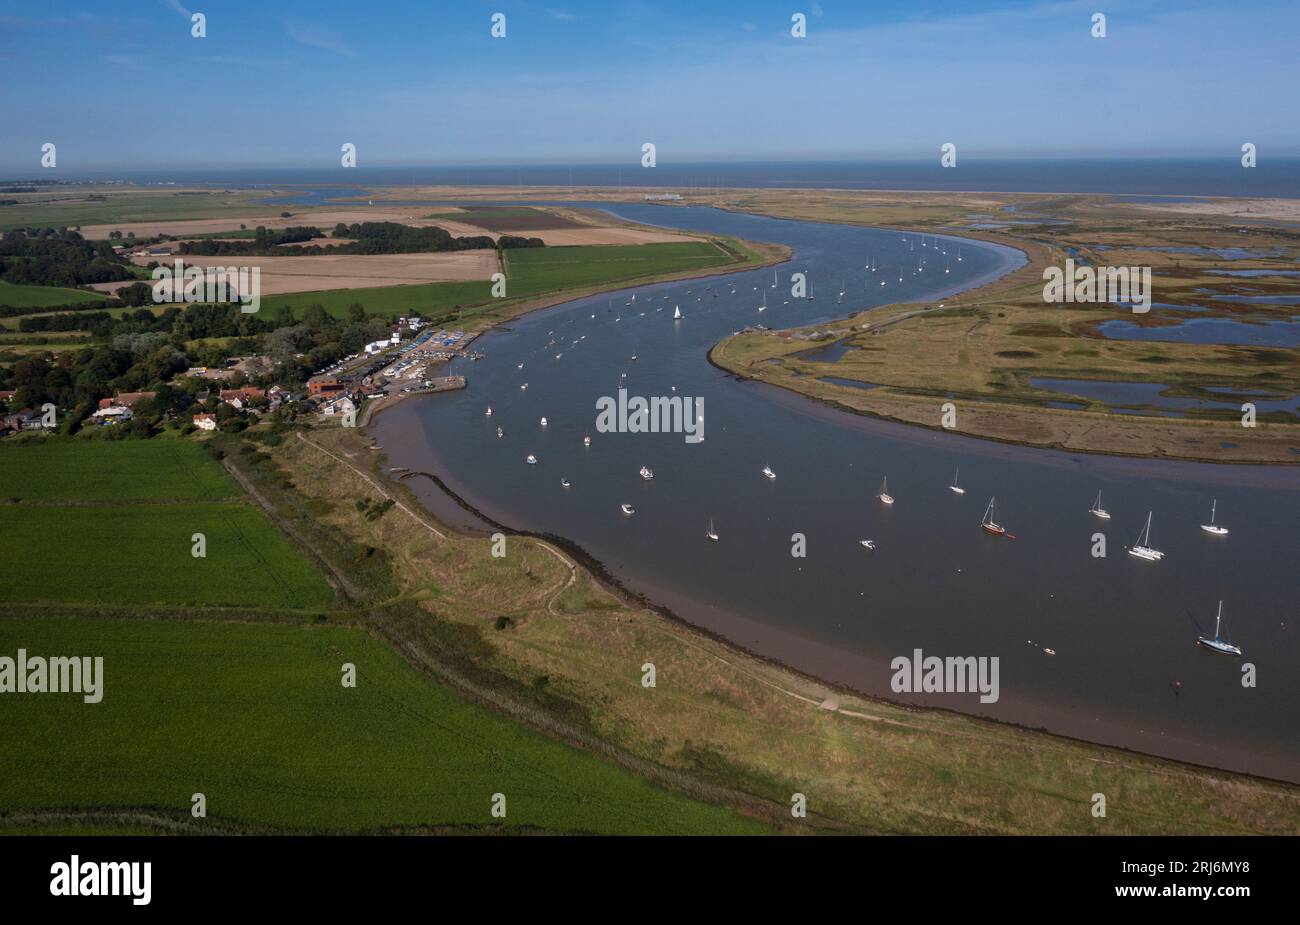 View along coast with Quay at Orford and river Alde ,Suffolk, England,Europe Stock Photo